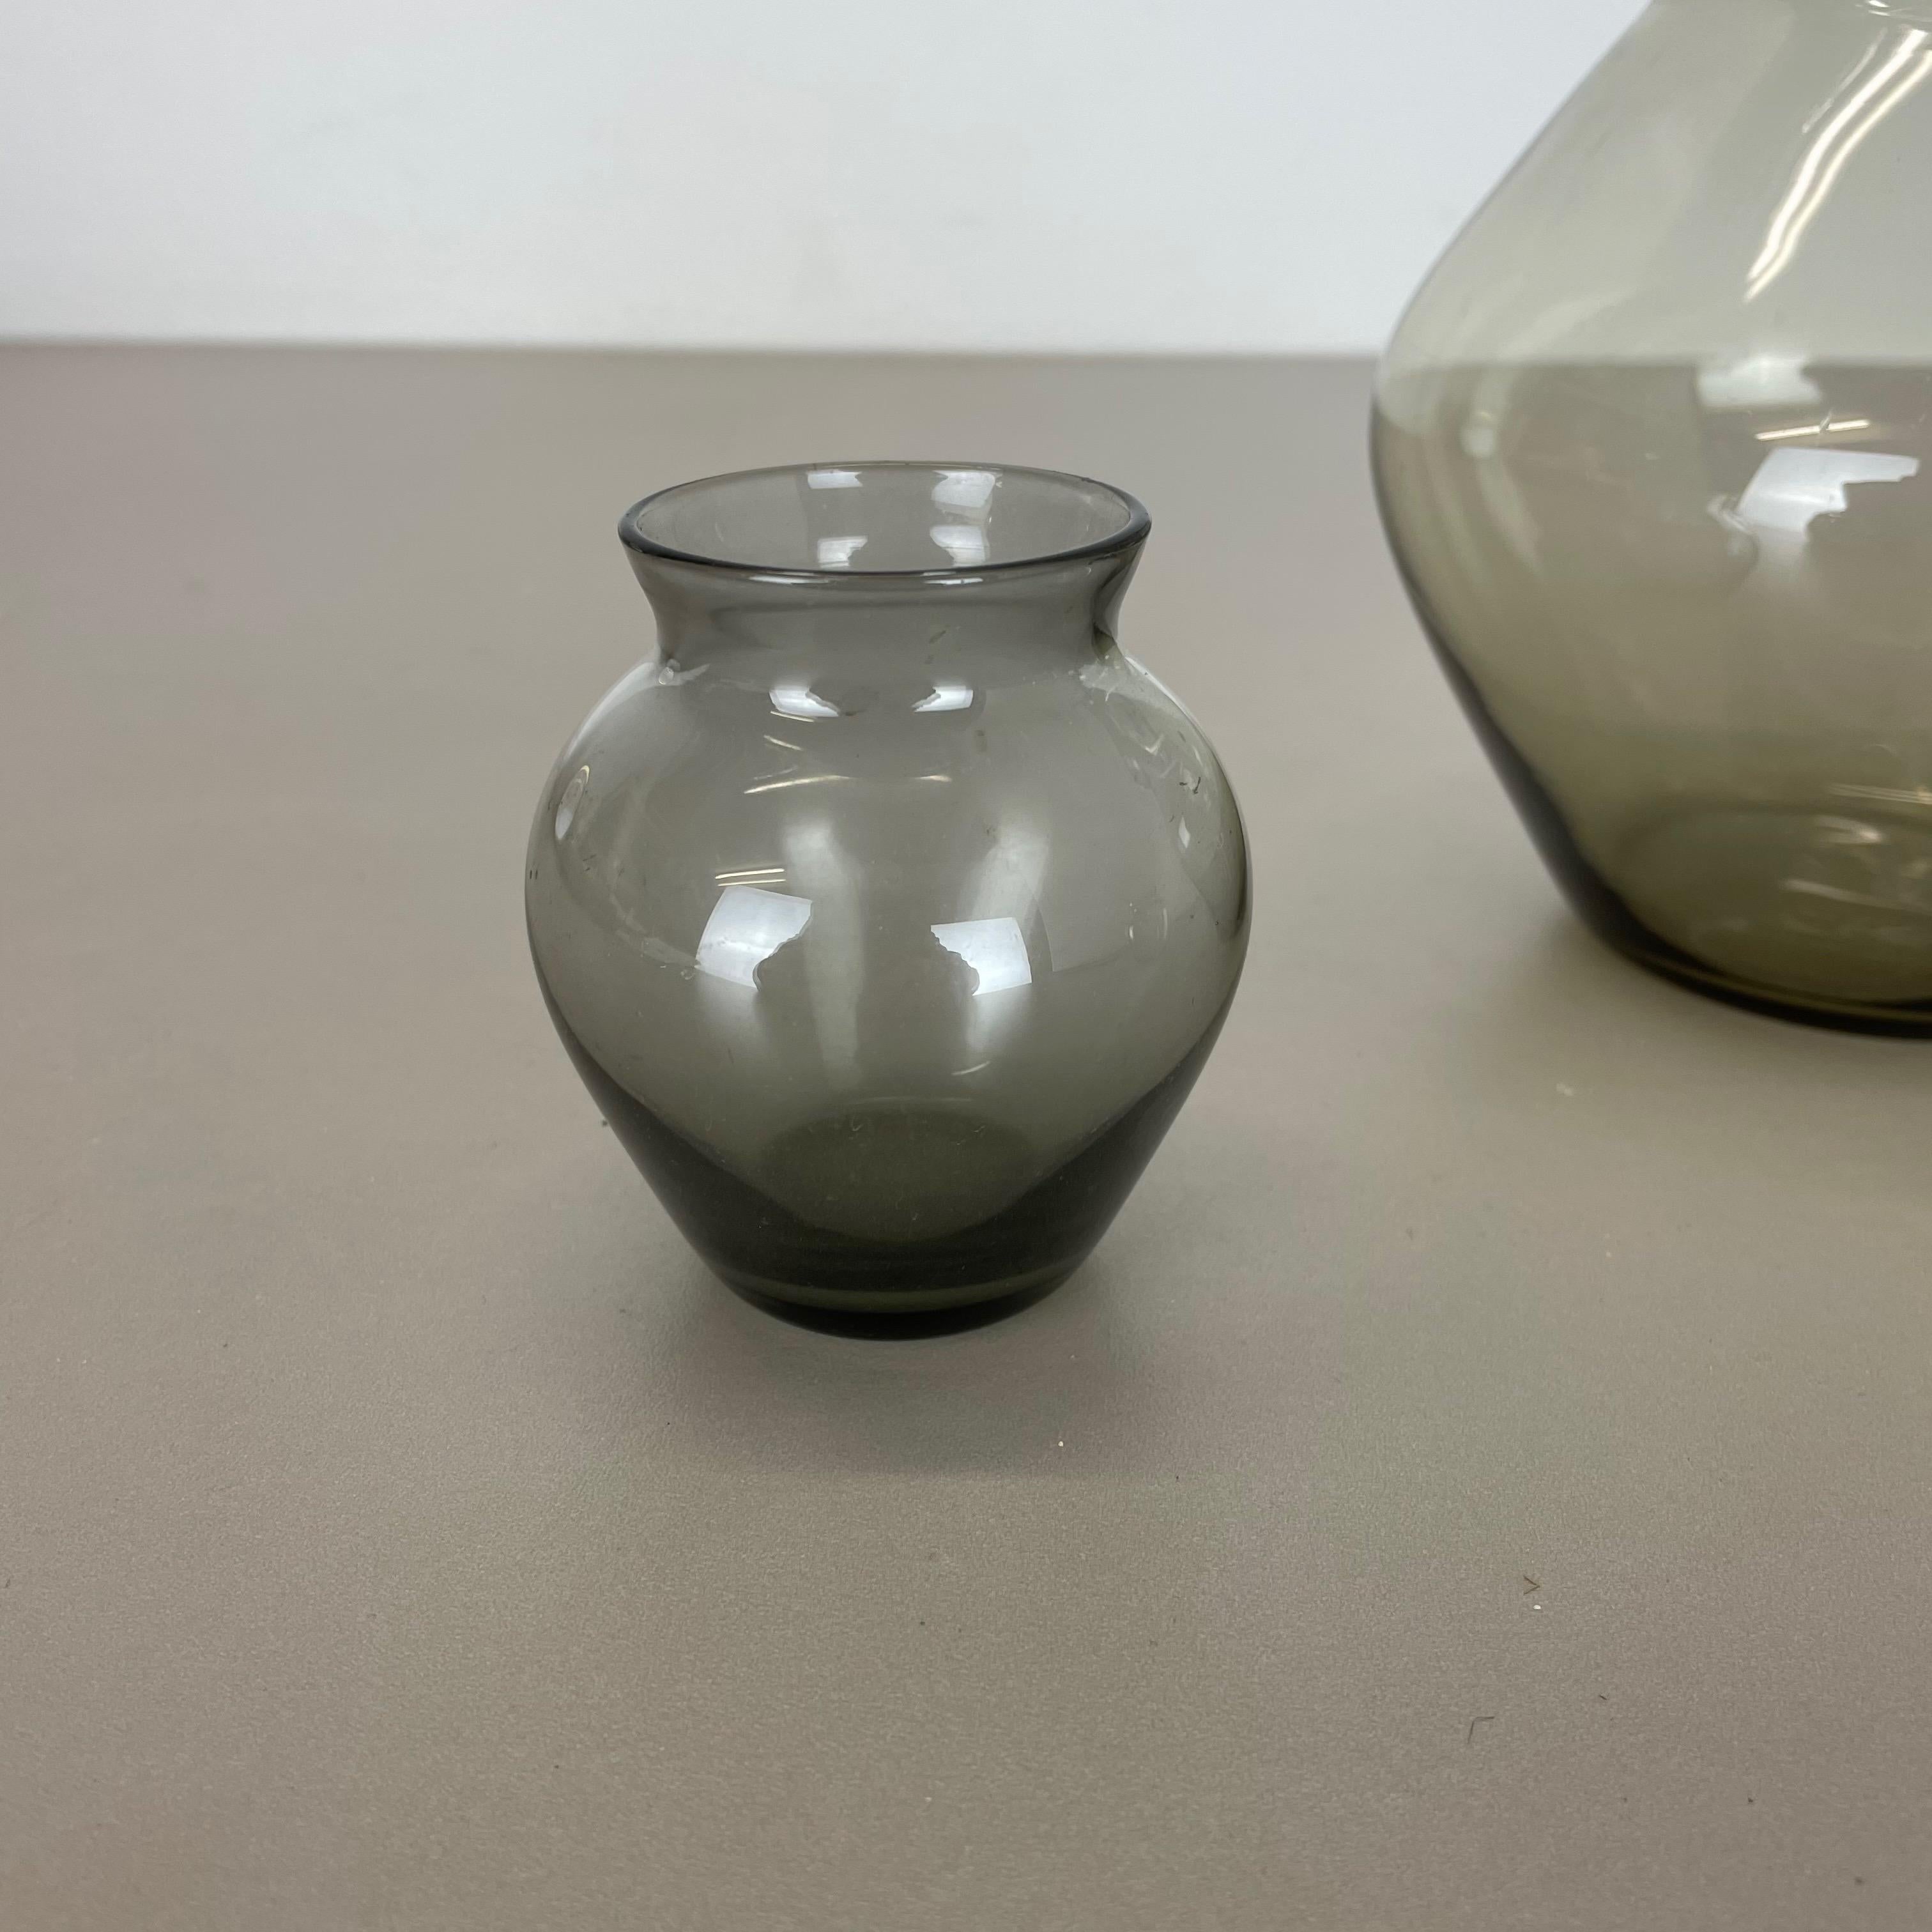 Vintage 1960s Set of Three Turmalin Vases by Wilhelm Wagenfeld for WMF, Germany In Good Condition For Sale In Kirchlengern, DE